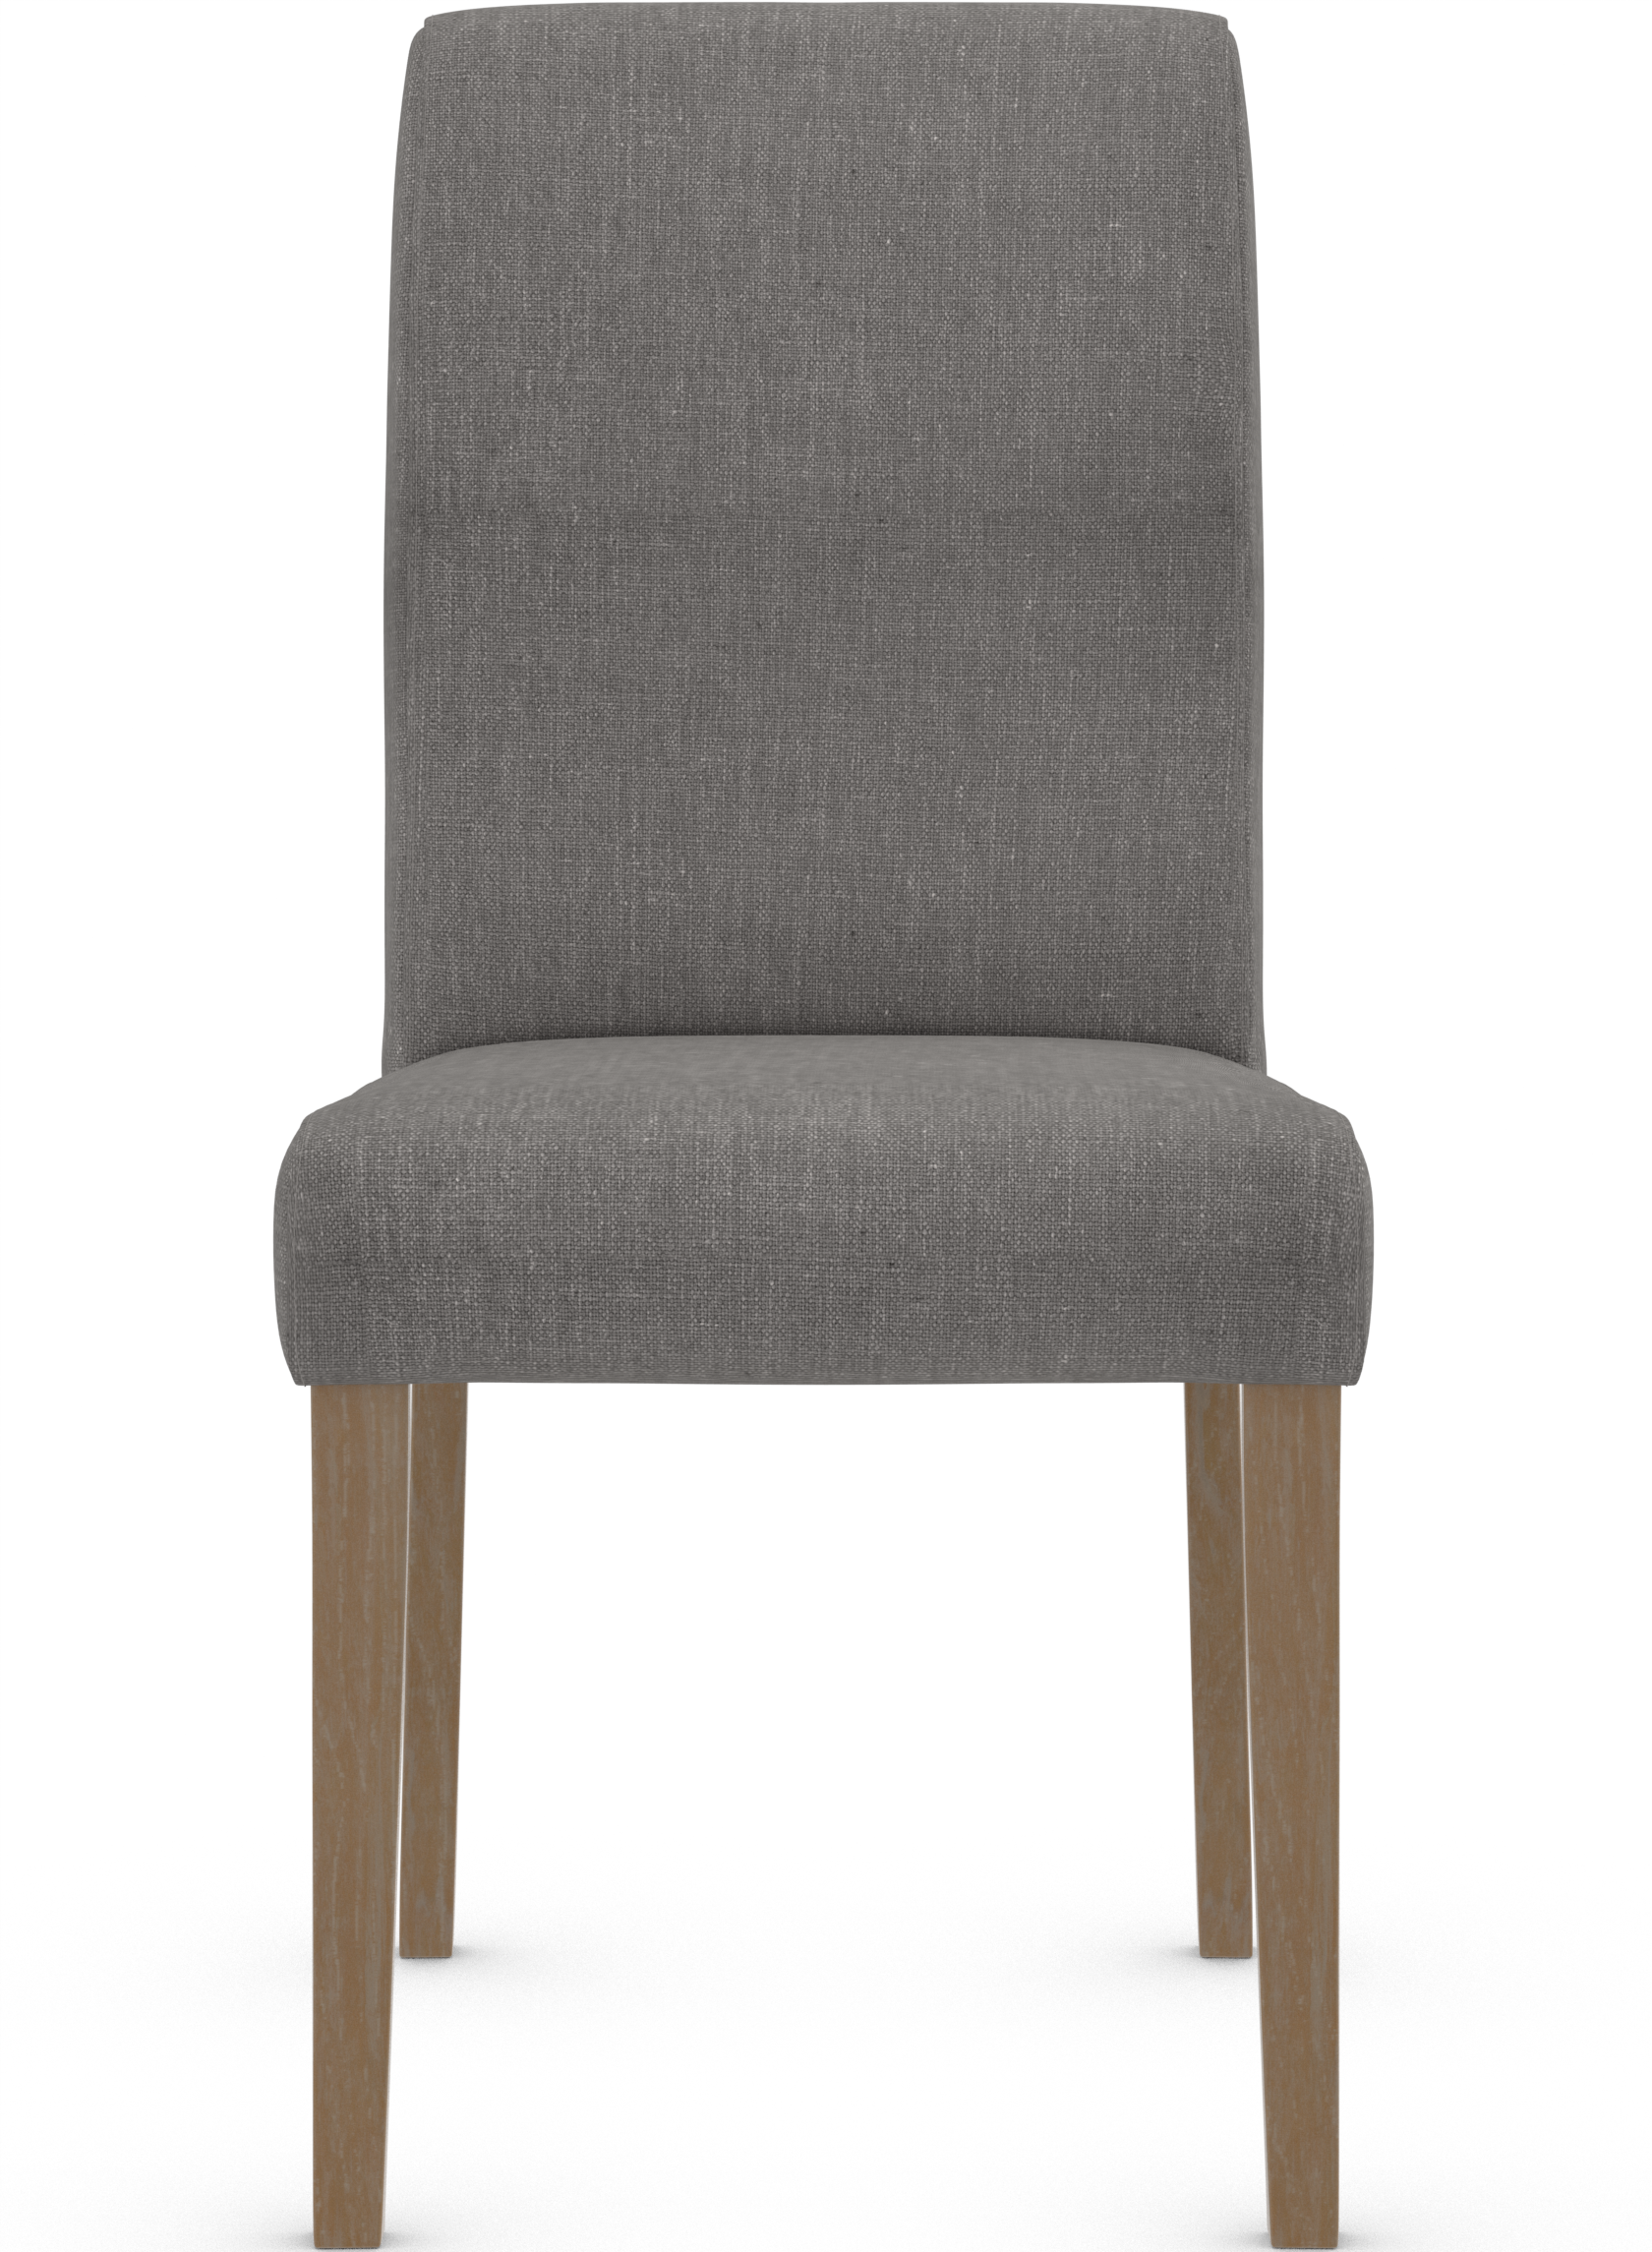 Firenze Antique Black Dining Chair Fabric 